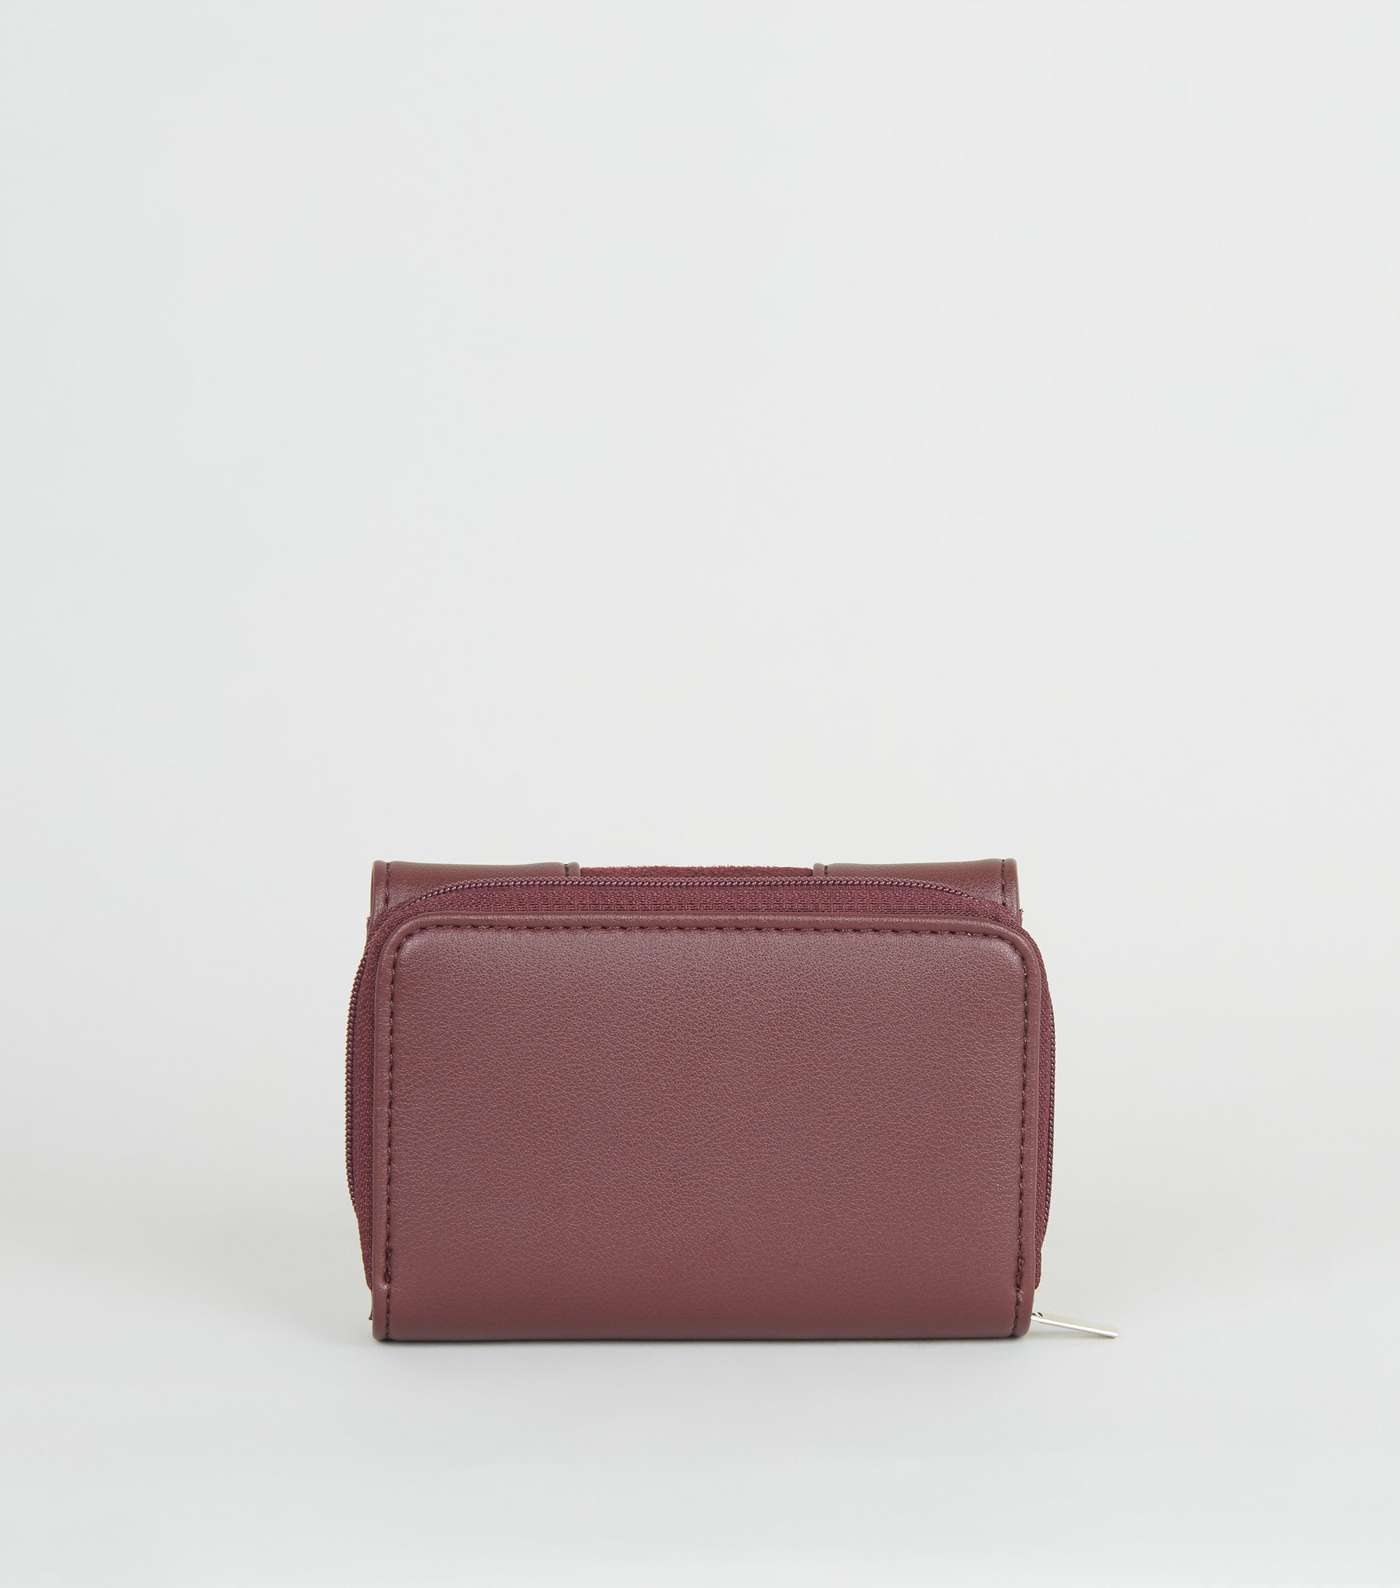 Burgundy Leather-Look Ring Front Purse Image 3